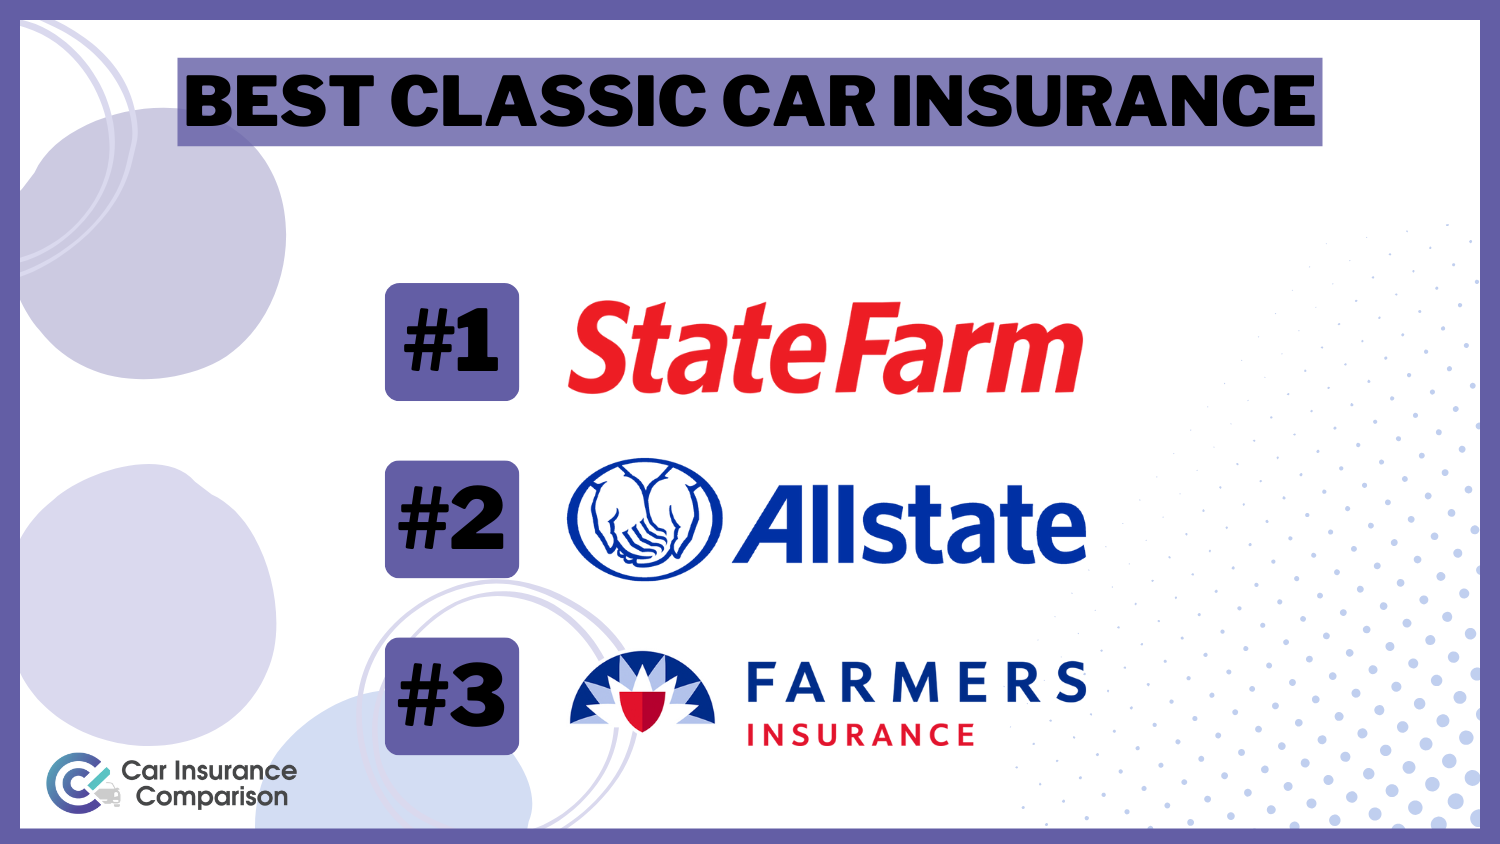 Best Classic Car Insurance: State Farm, Allstate, and Farmers